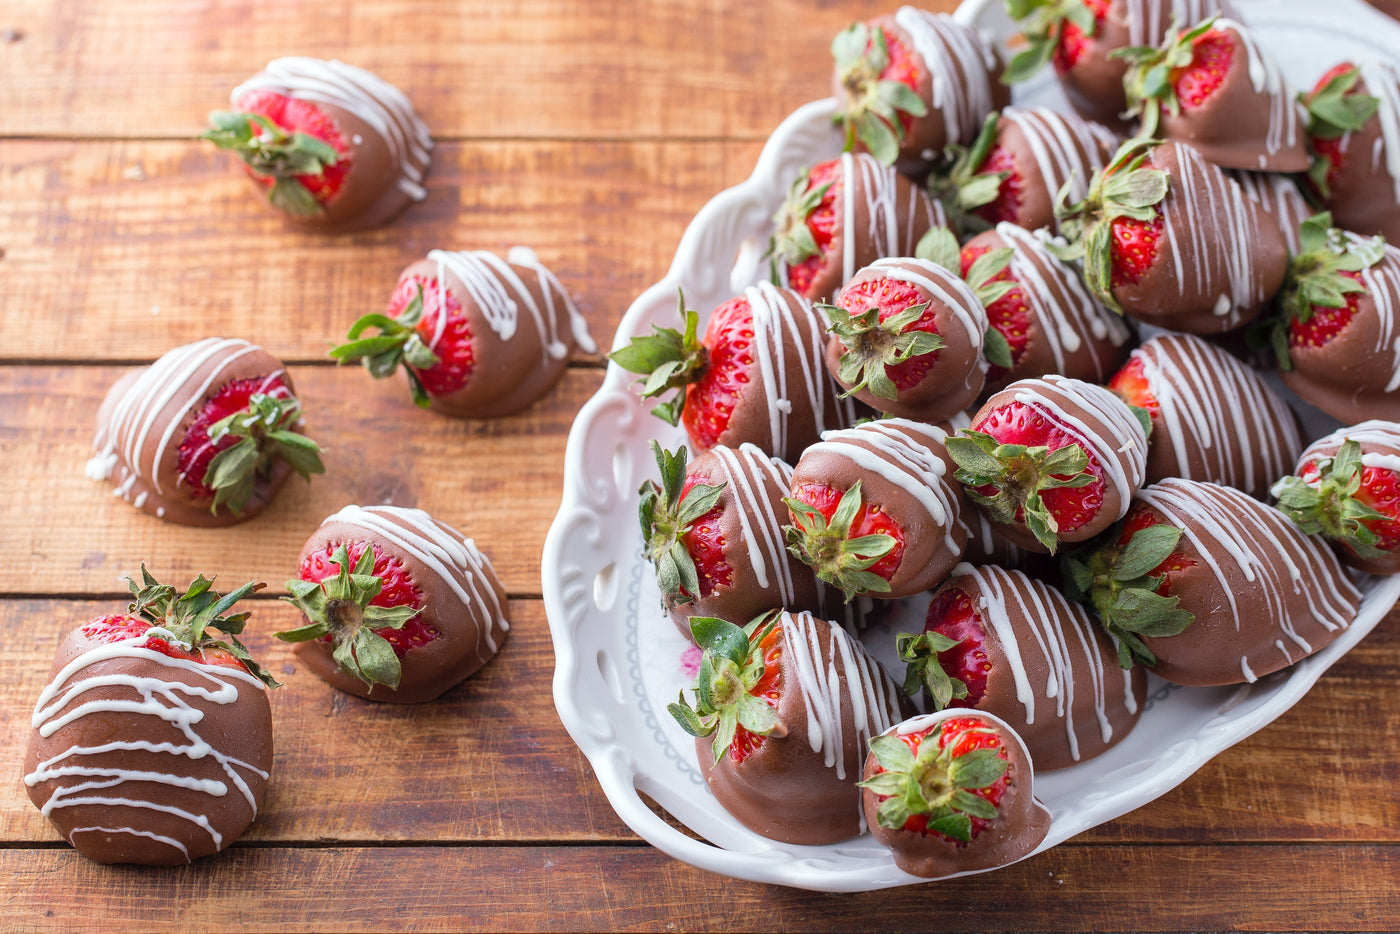 Love strawberries with chocolate for Valentine's Day #pregnantproof